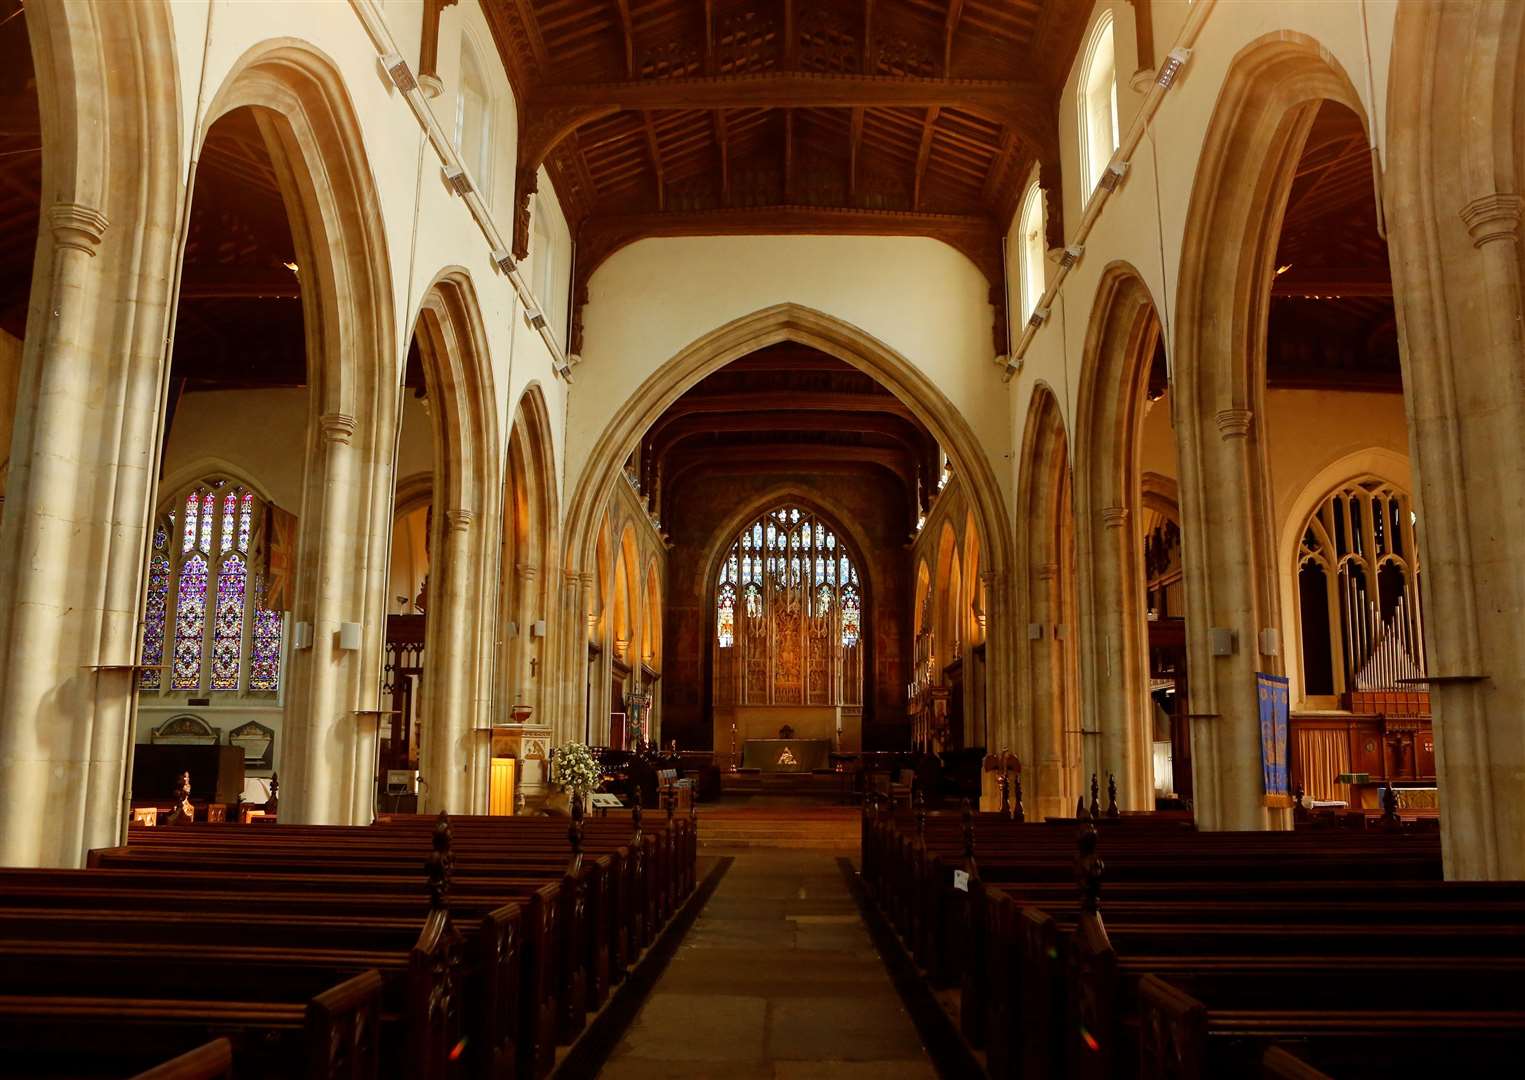 All Saints Church will be the setting for his visit